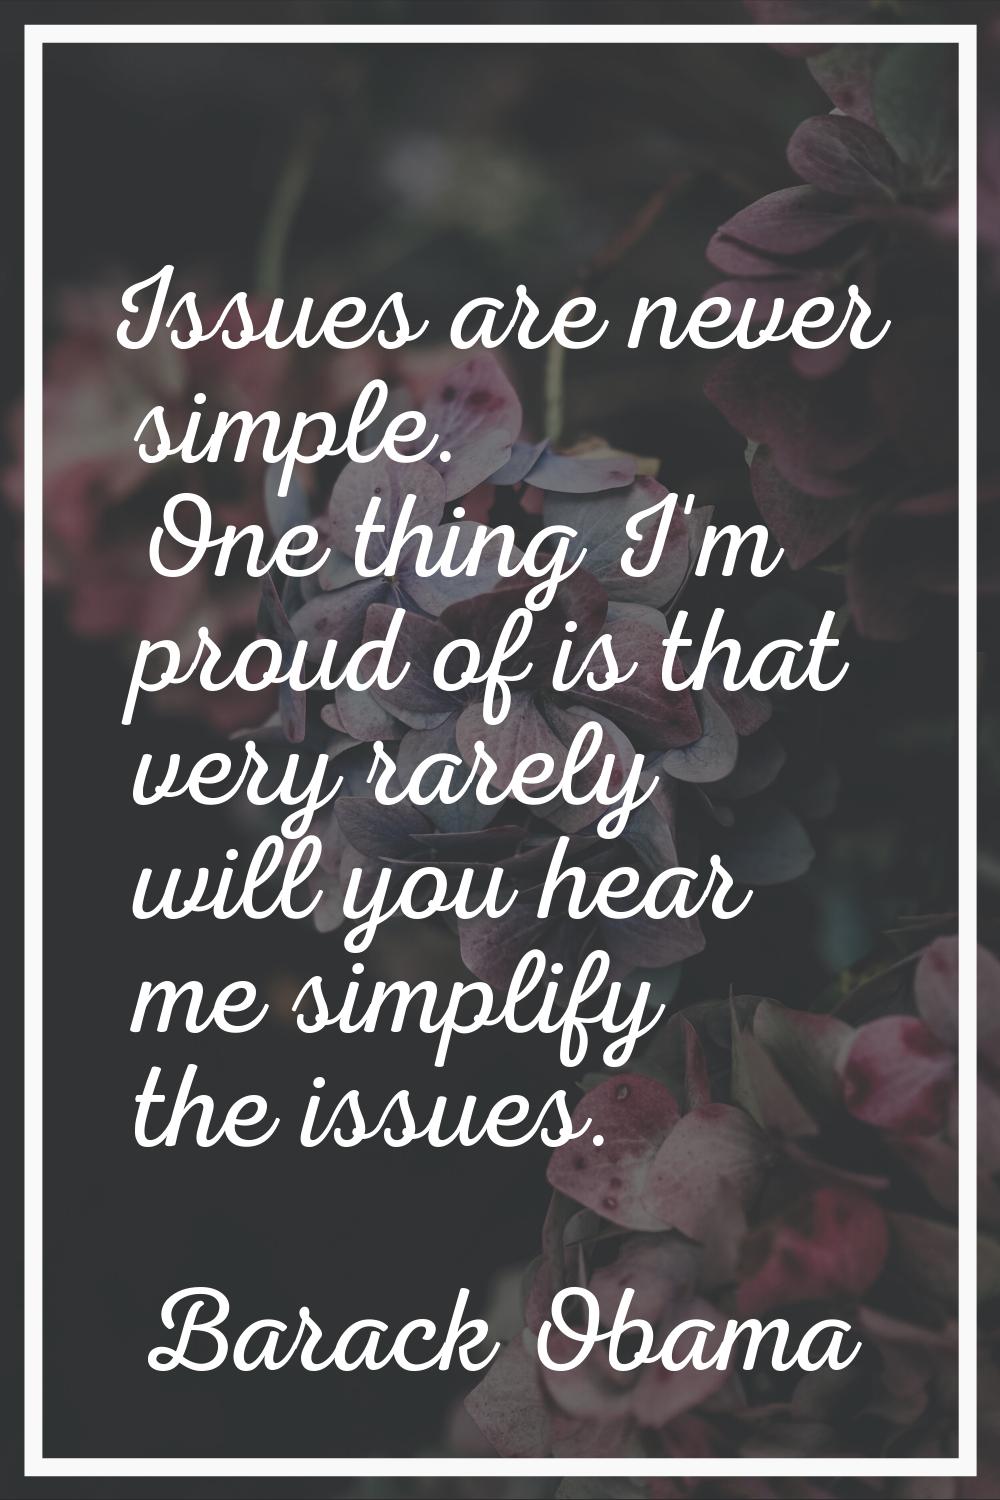 Issues are never simple. One thing I'm proud of is that very rarely will you hear me simplify the i